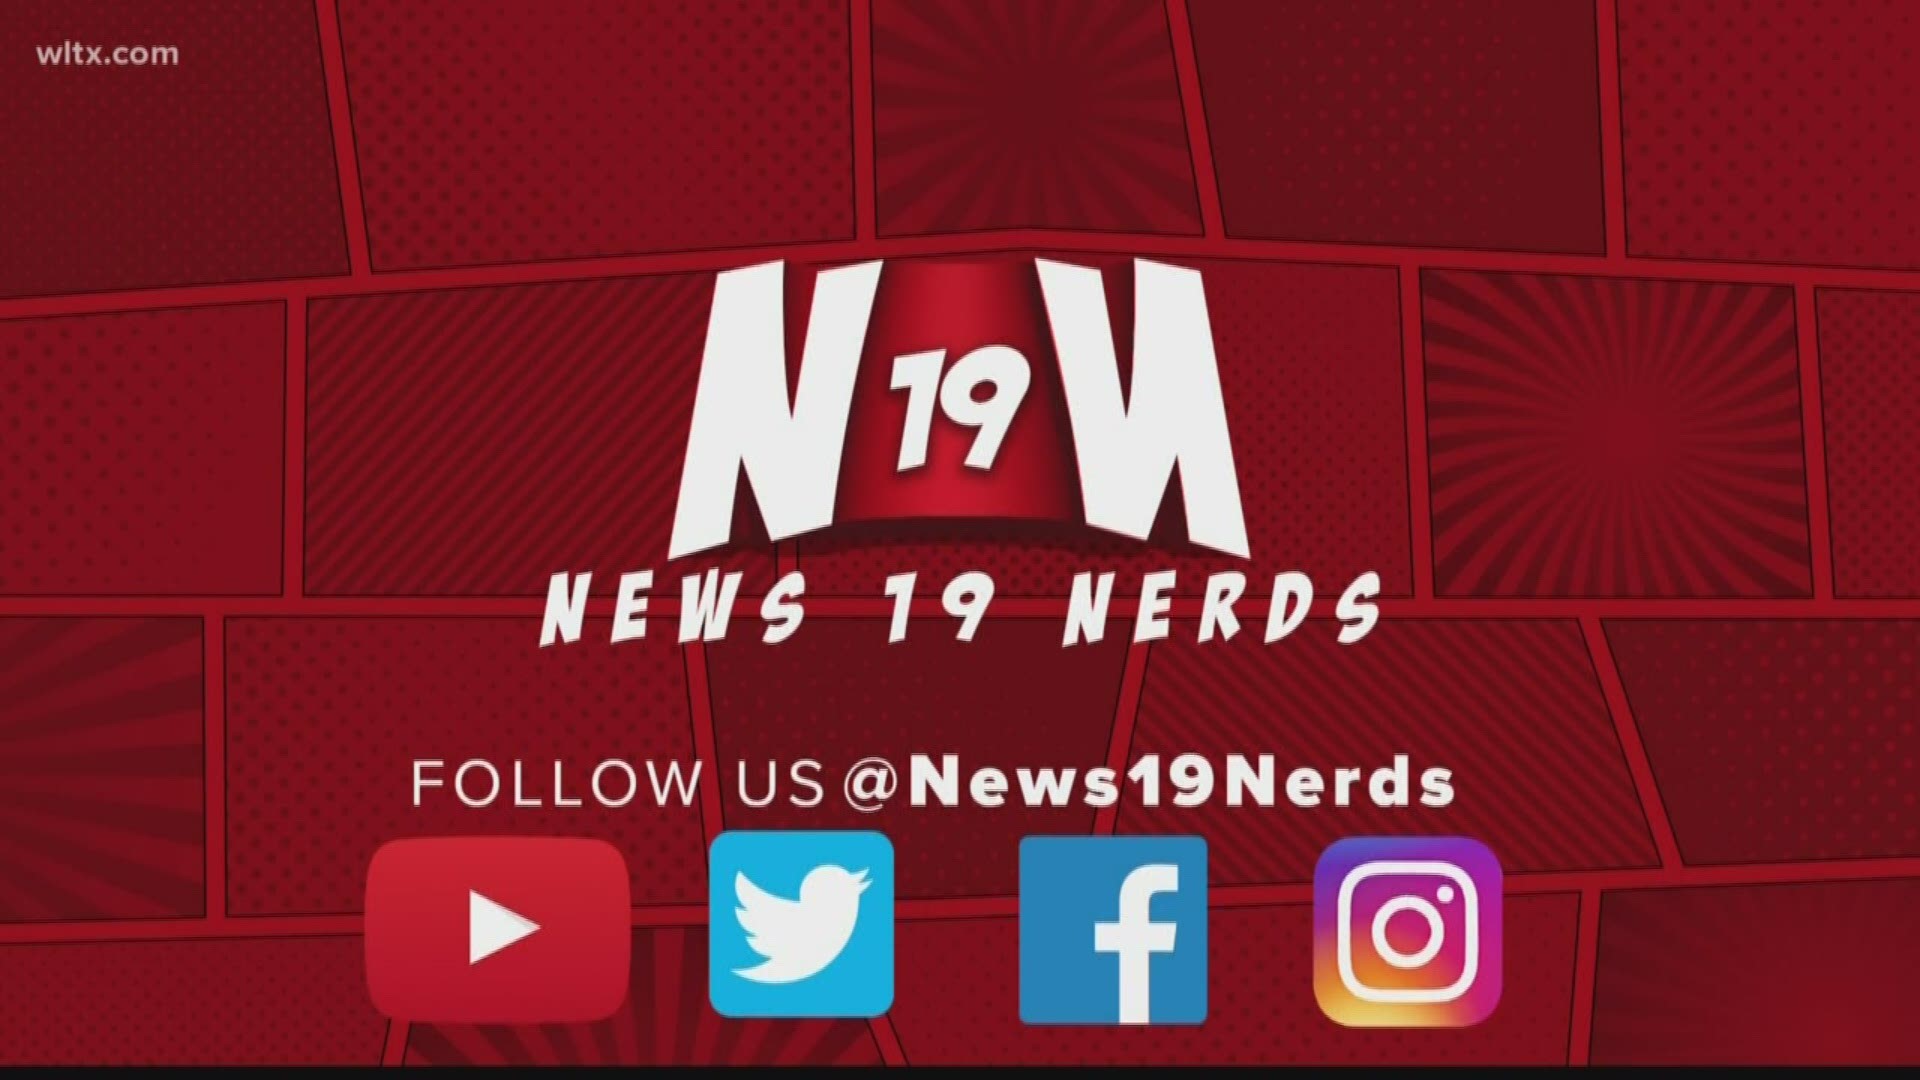 Leroy Green and Michael Patterson from the News19 Nerds have the latest updates on January 10, 2020.